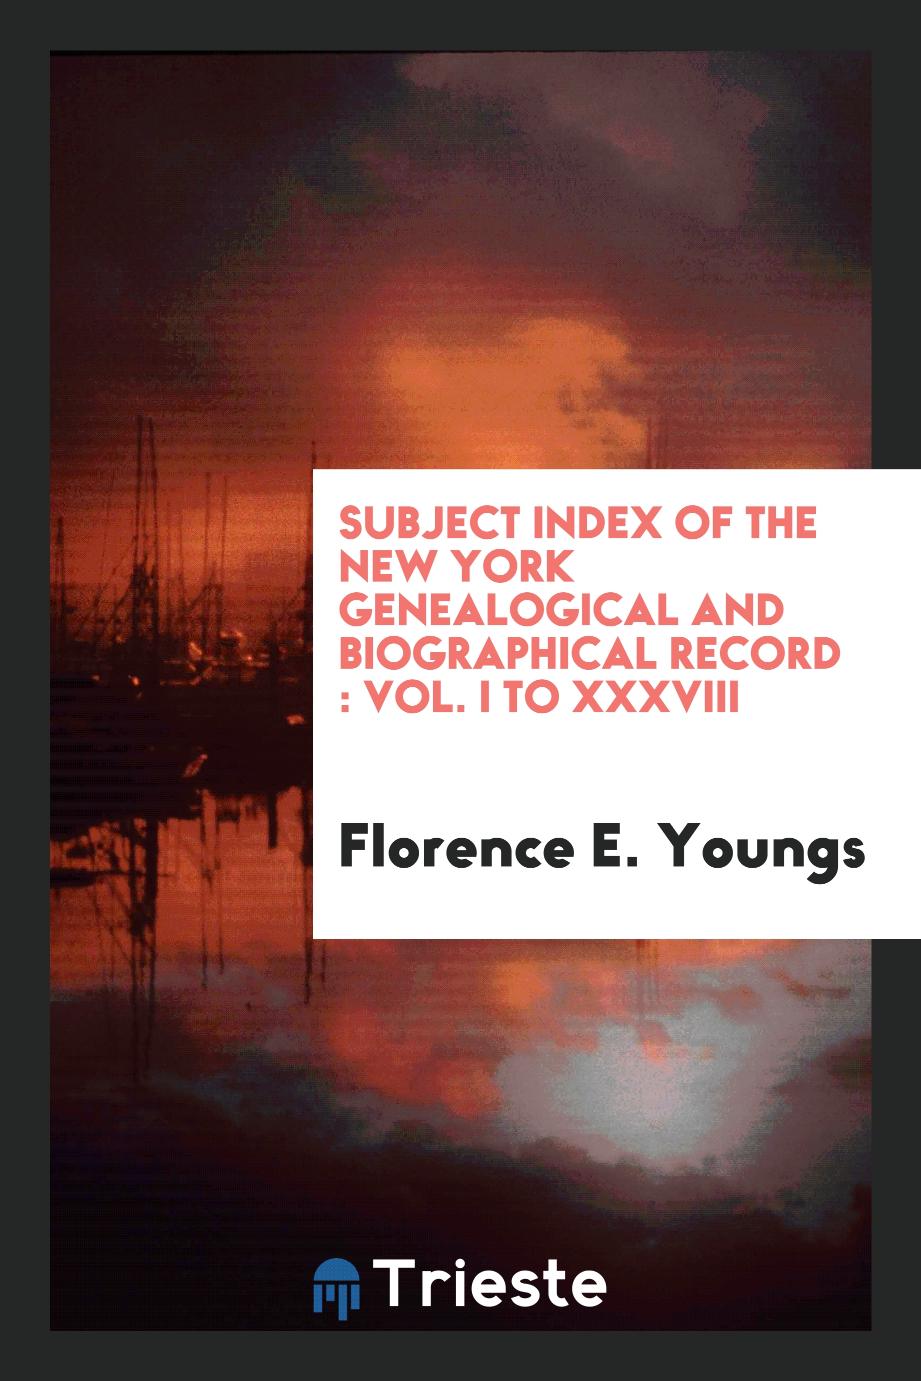 Subject index of the New York genealogical and biographical record : vol. I to XXXVIII